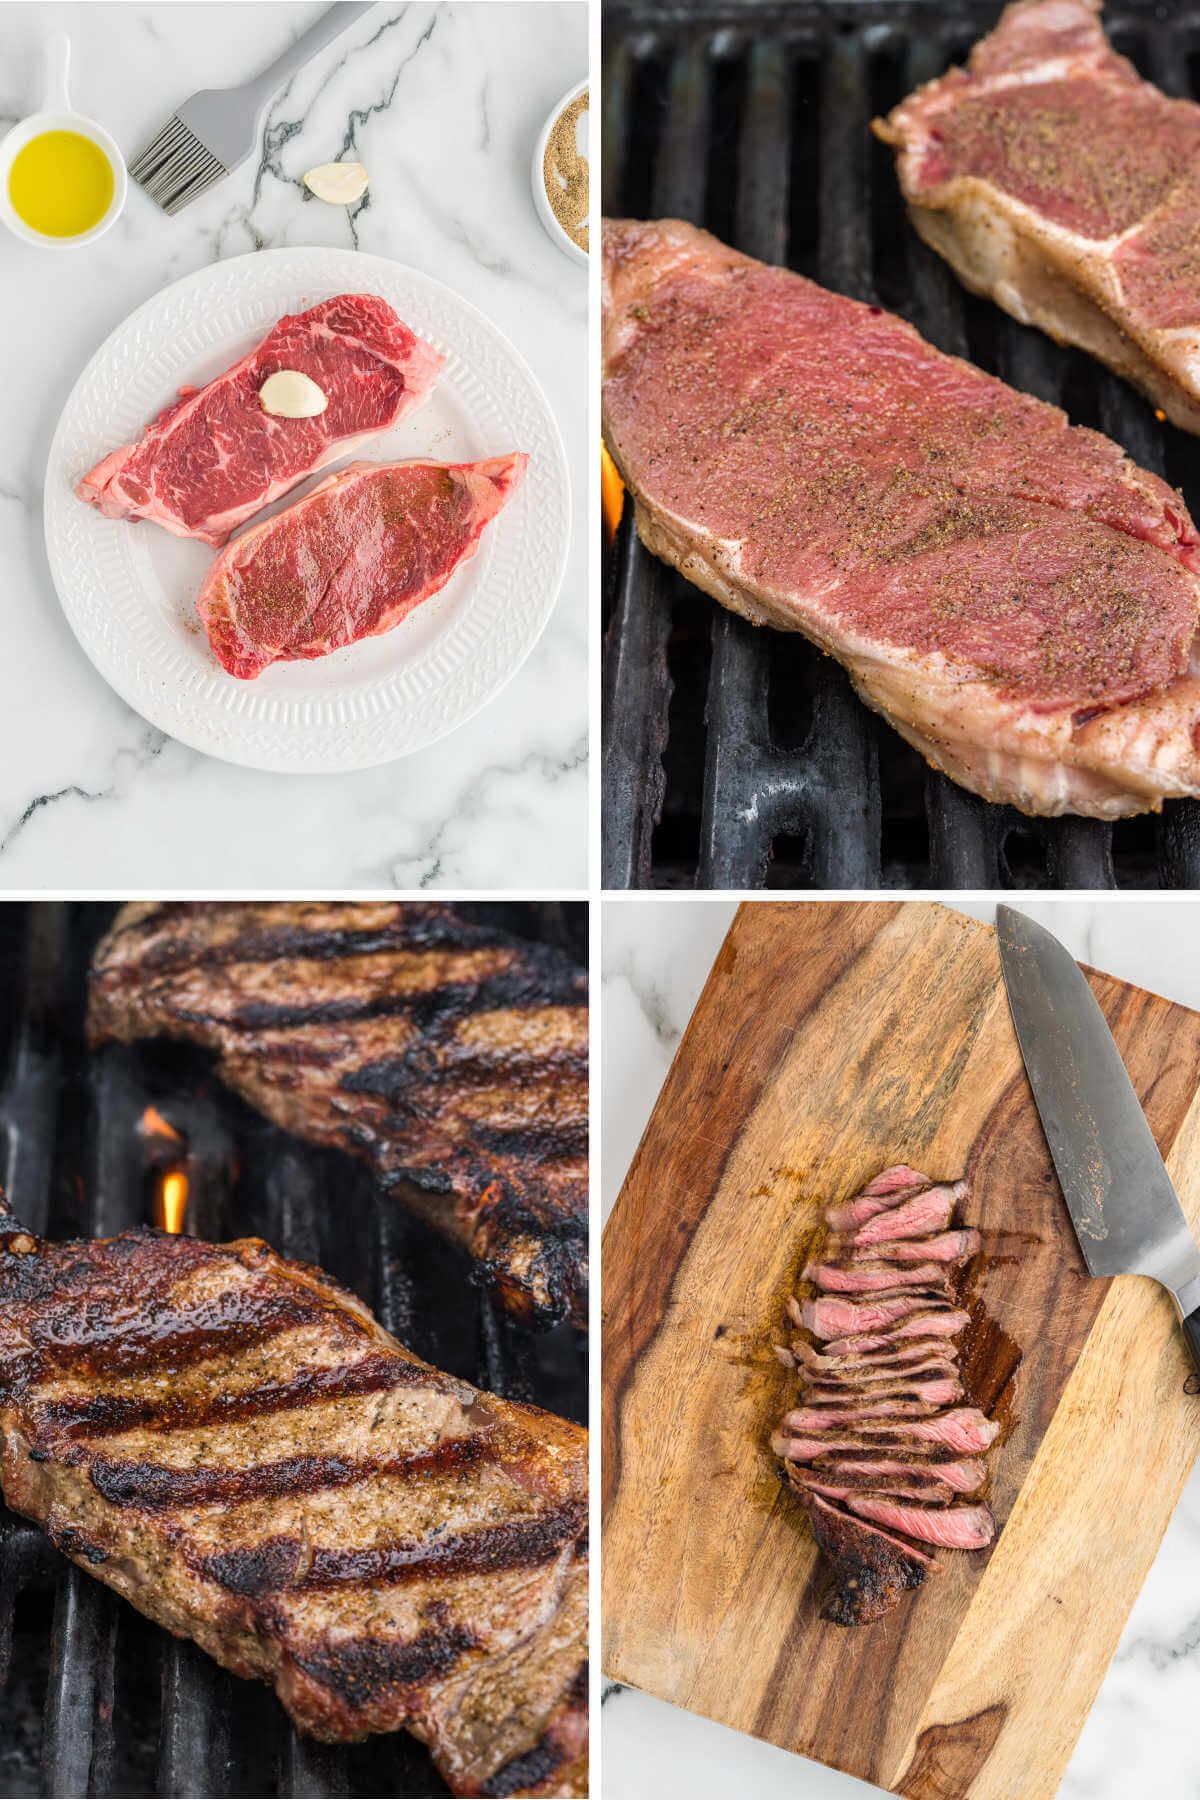 process steps for seasoning and grilling steaks for a grilled steak salad.